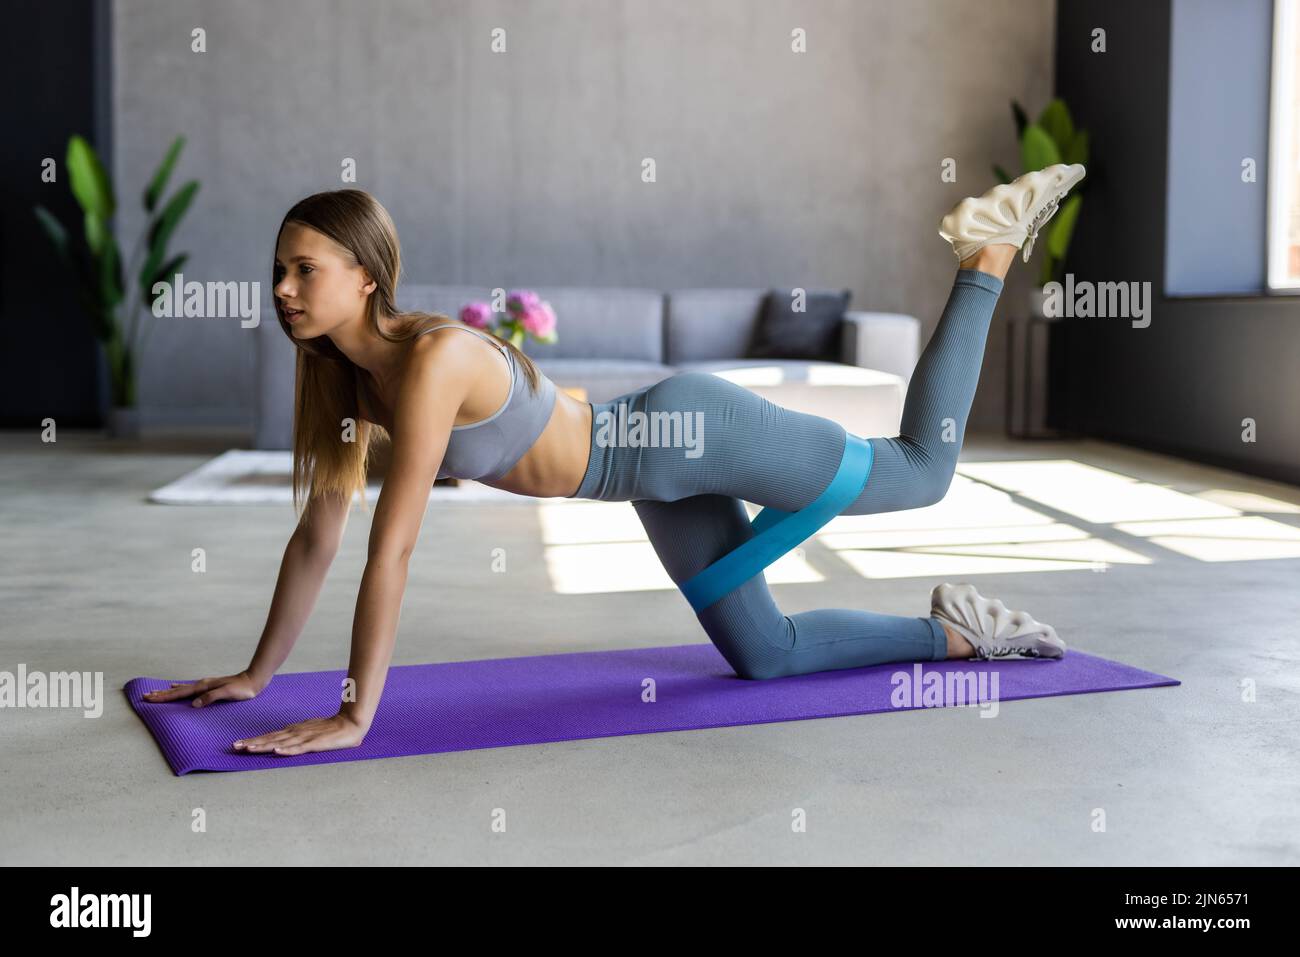 Young woman exercising with an elsatic band on the floor at home Stock Photo